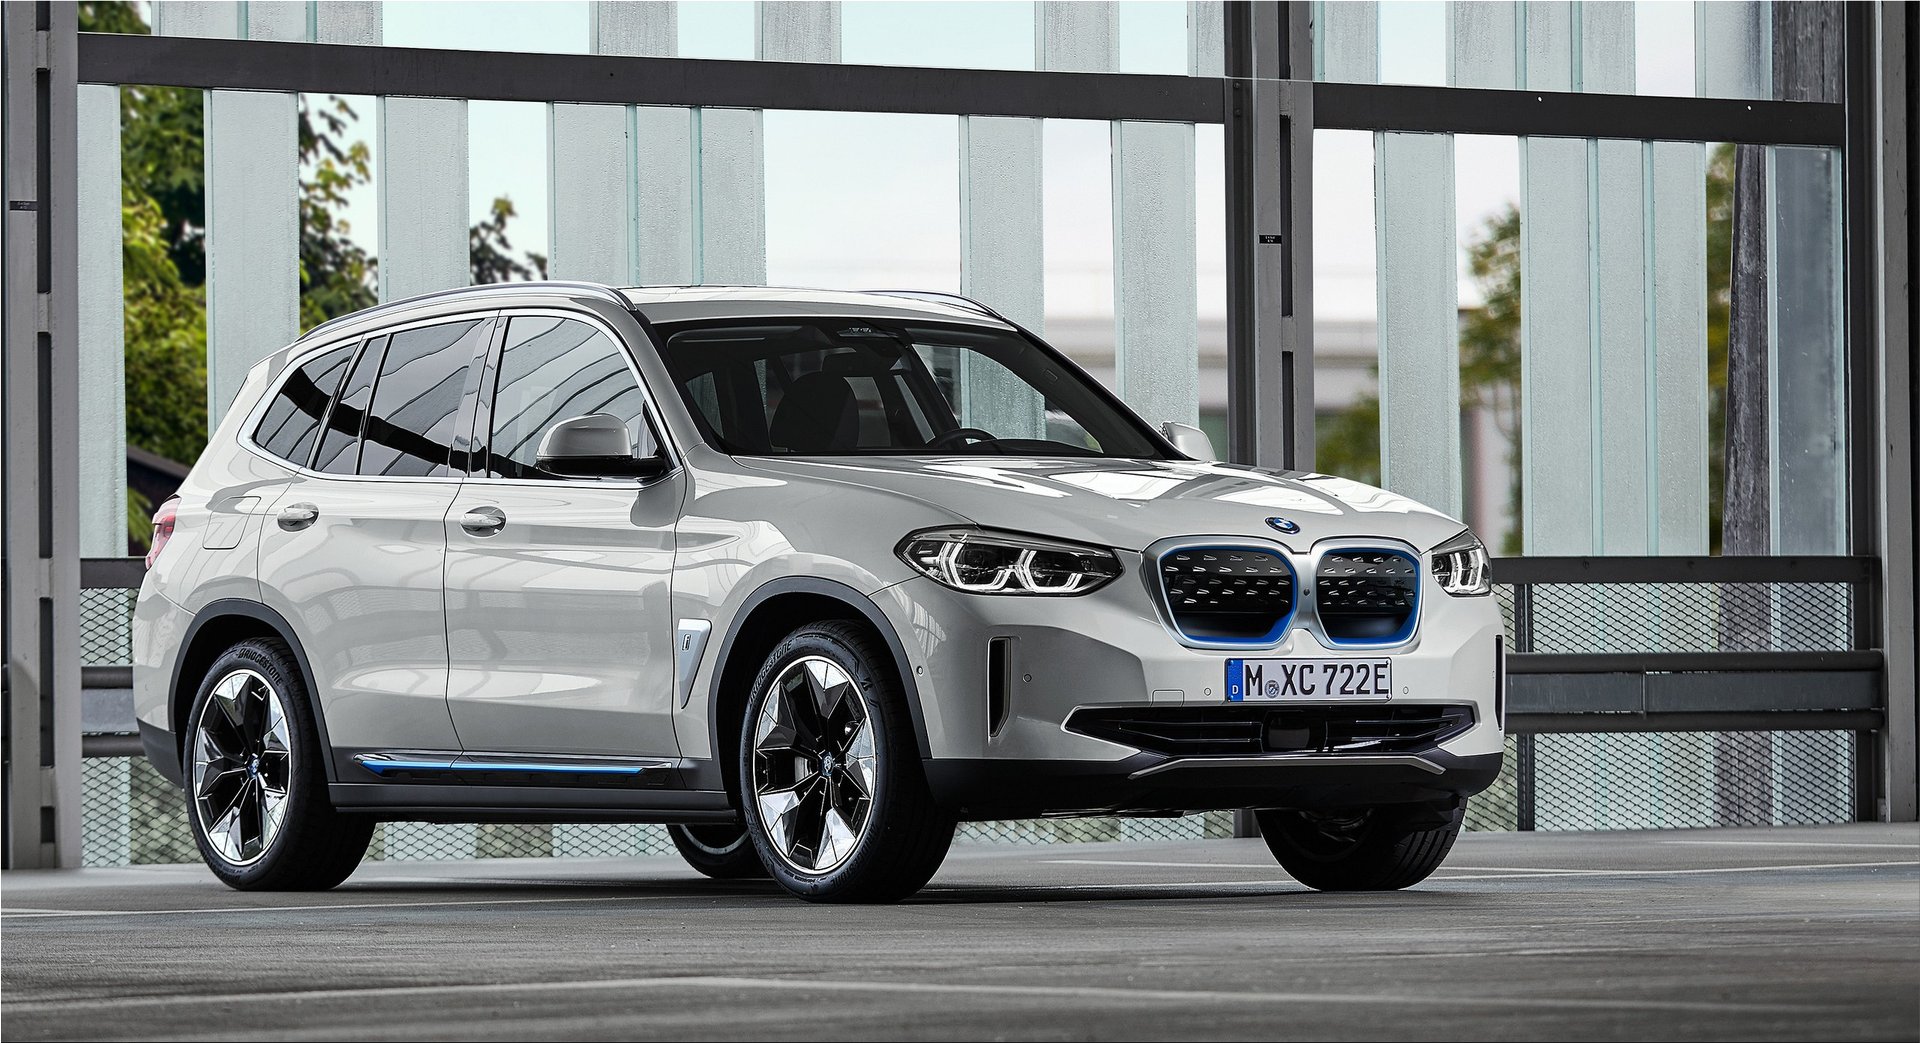 The new BMW iX3 electric SUV specs and pictures Electric Hunter